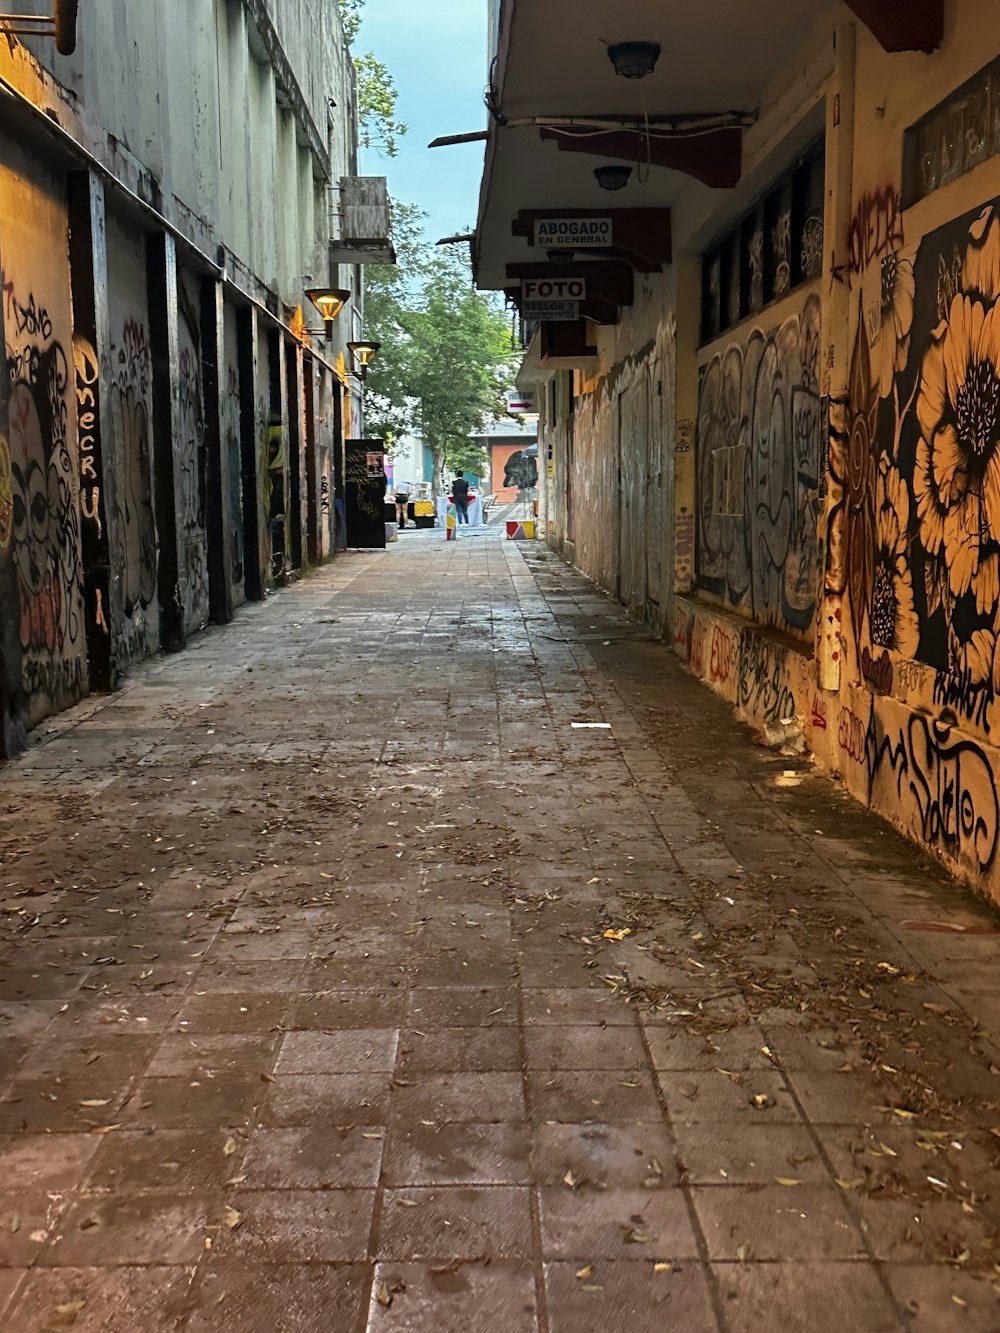 an empty street with graffiti on the walls